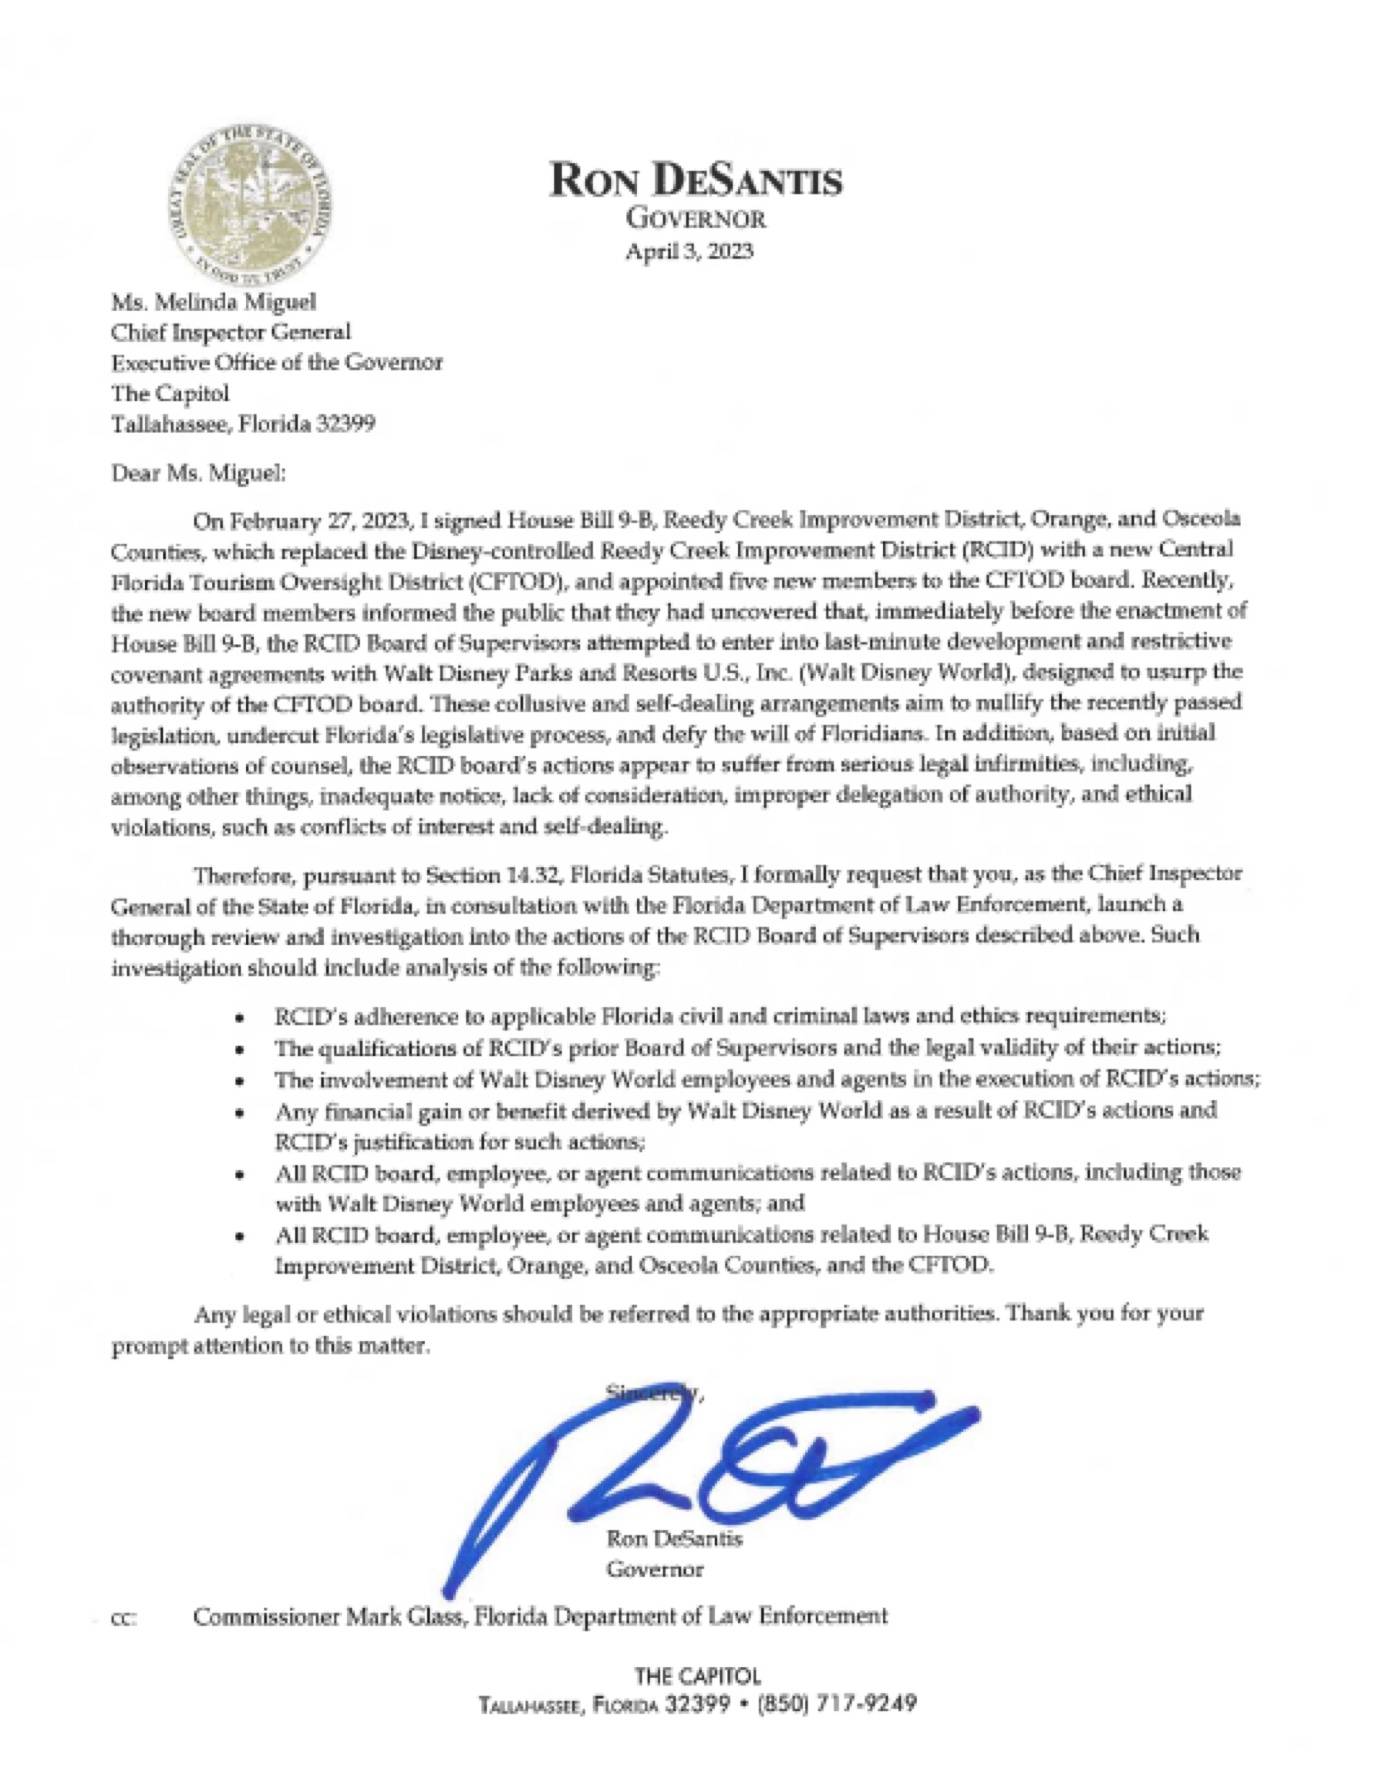 Governor DeSantis letter to Chief Inspector General